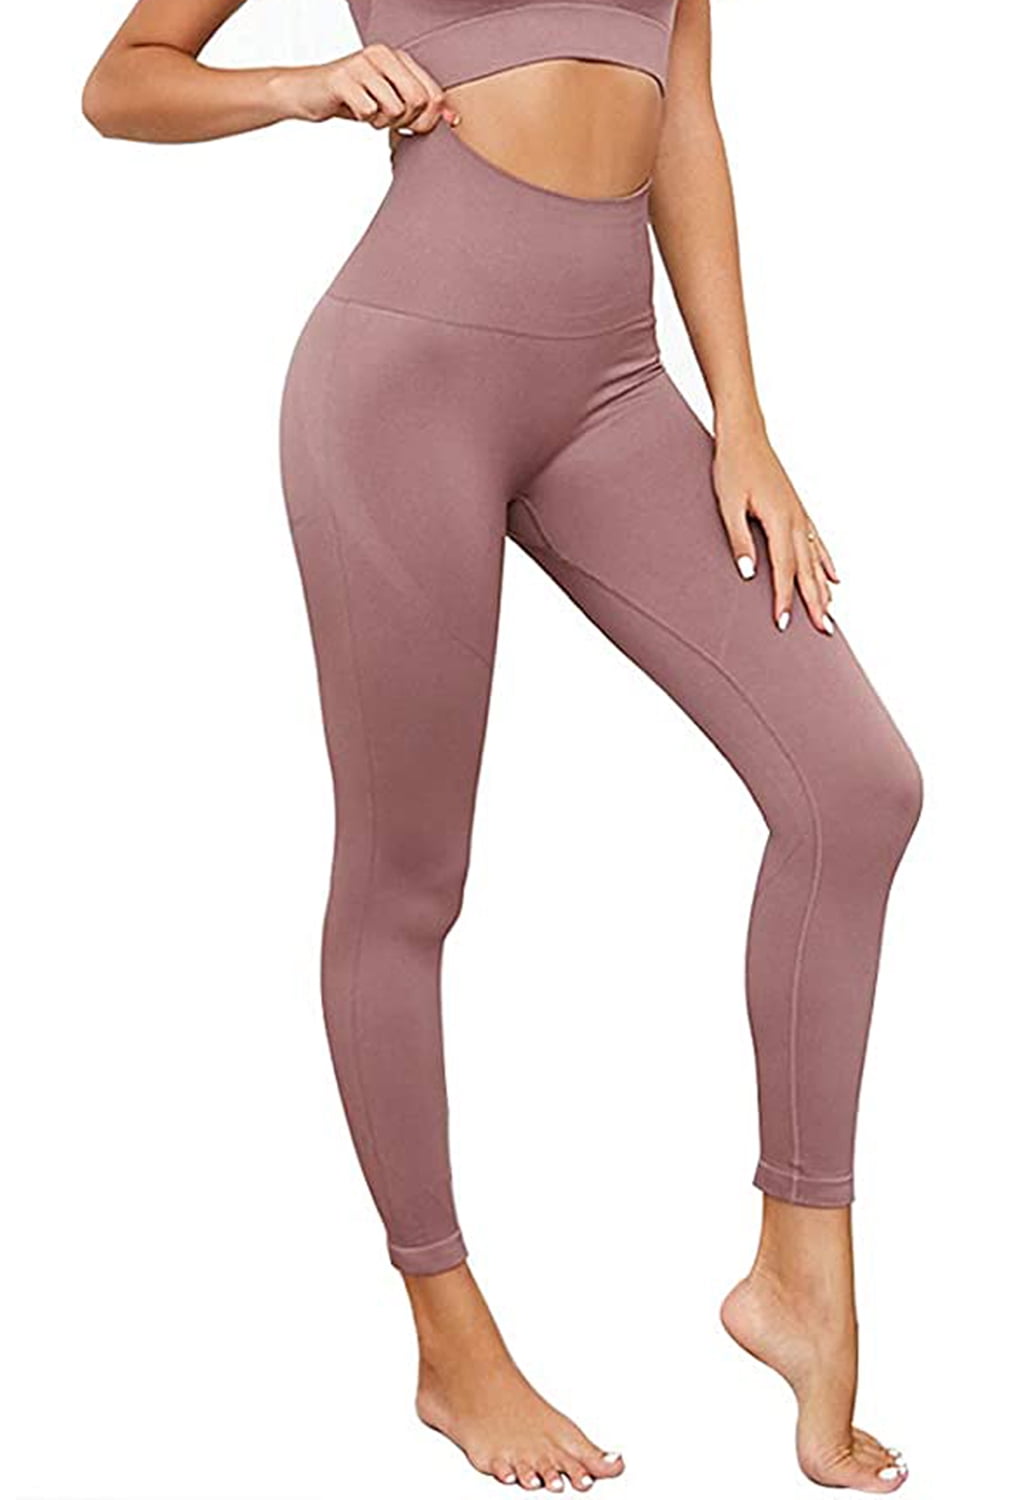 COMFREE Women Seamless High Waist Leggings Tummy Control Workout Yoga Pants  Gym Sport Compression Tights 